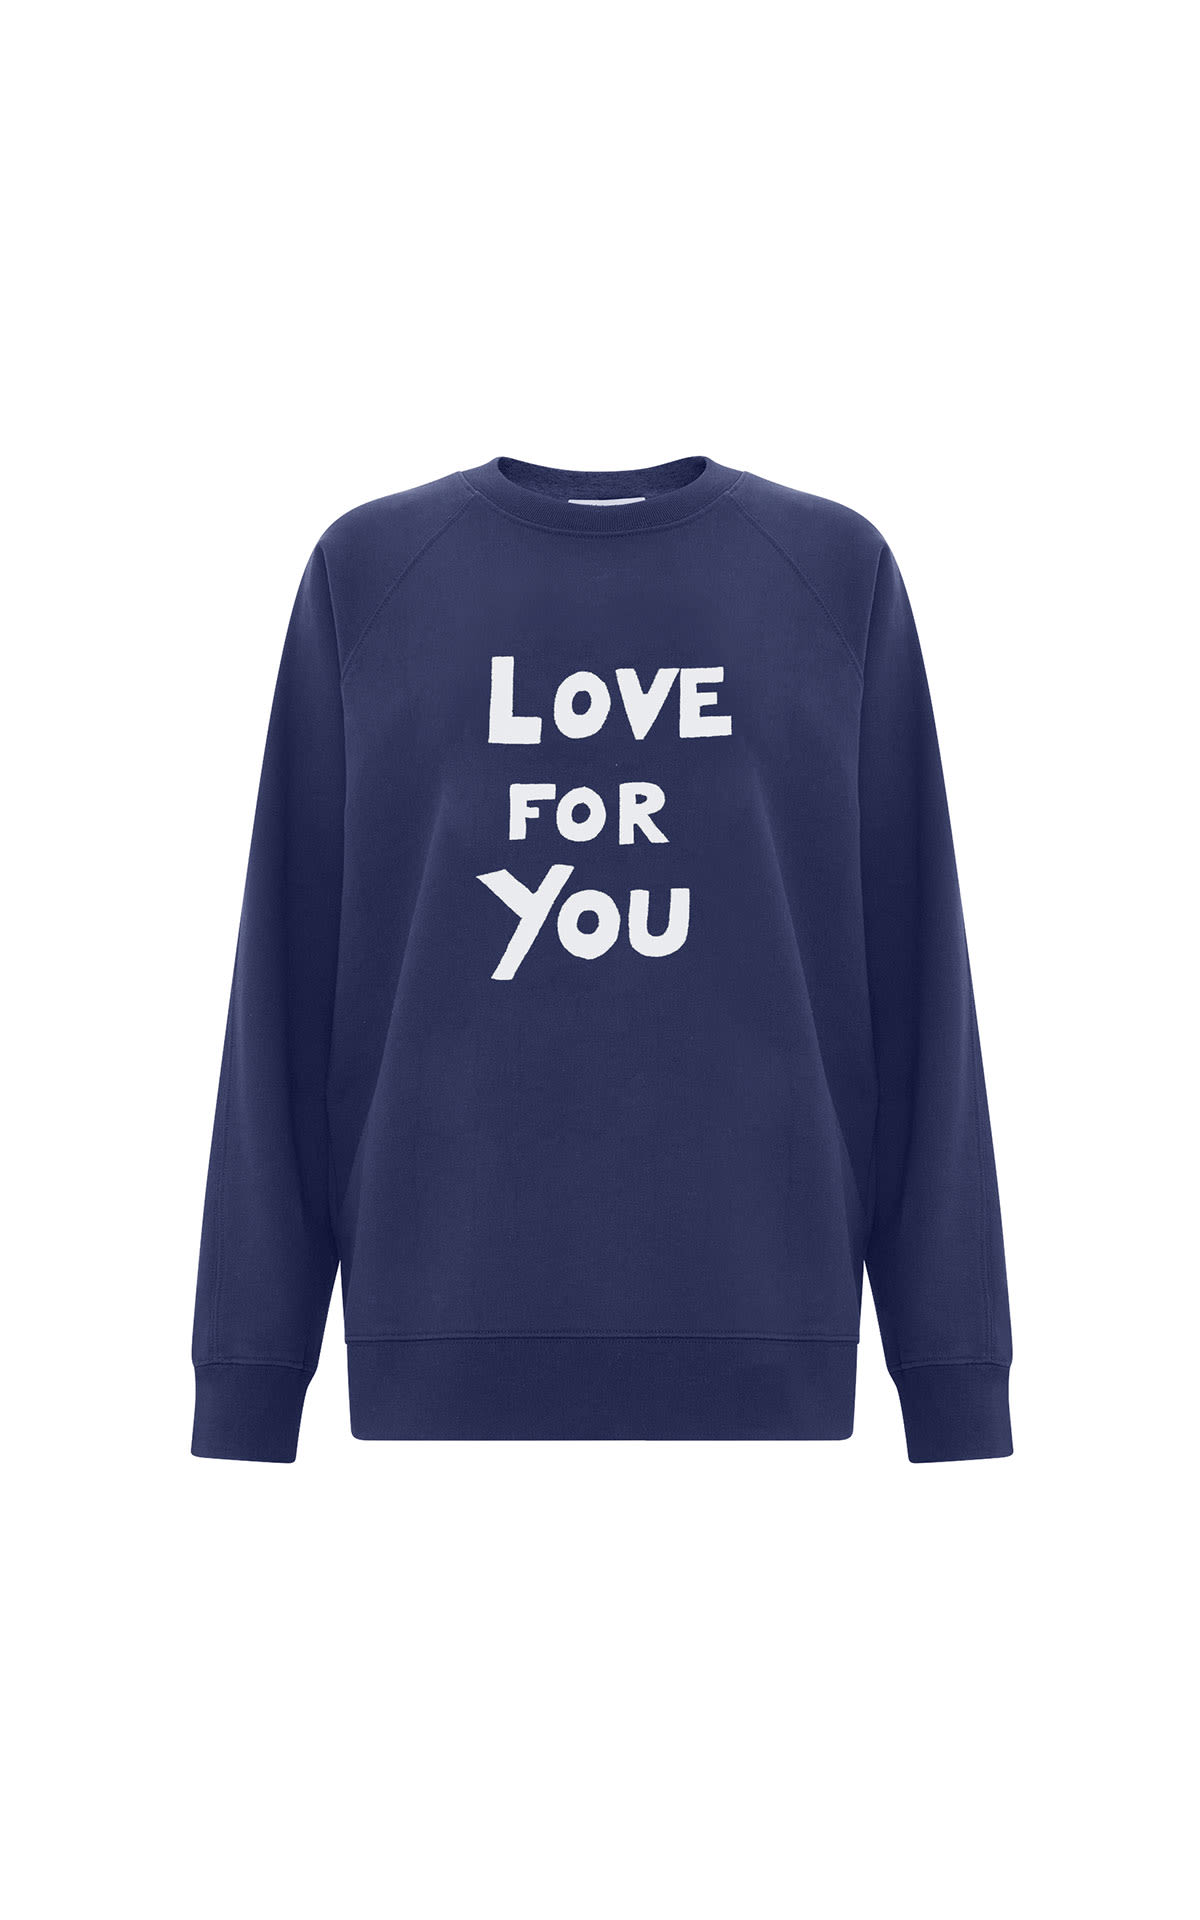 Bella Freud Love for you navy sweatshirt from Bicester Village